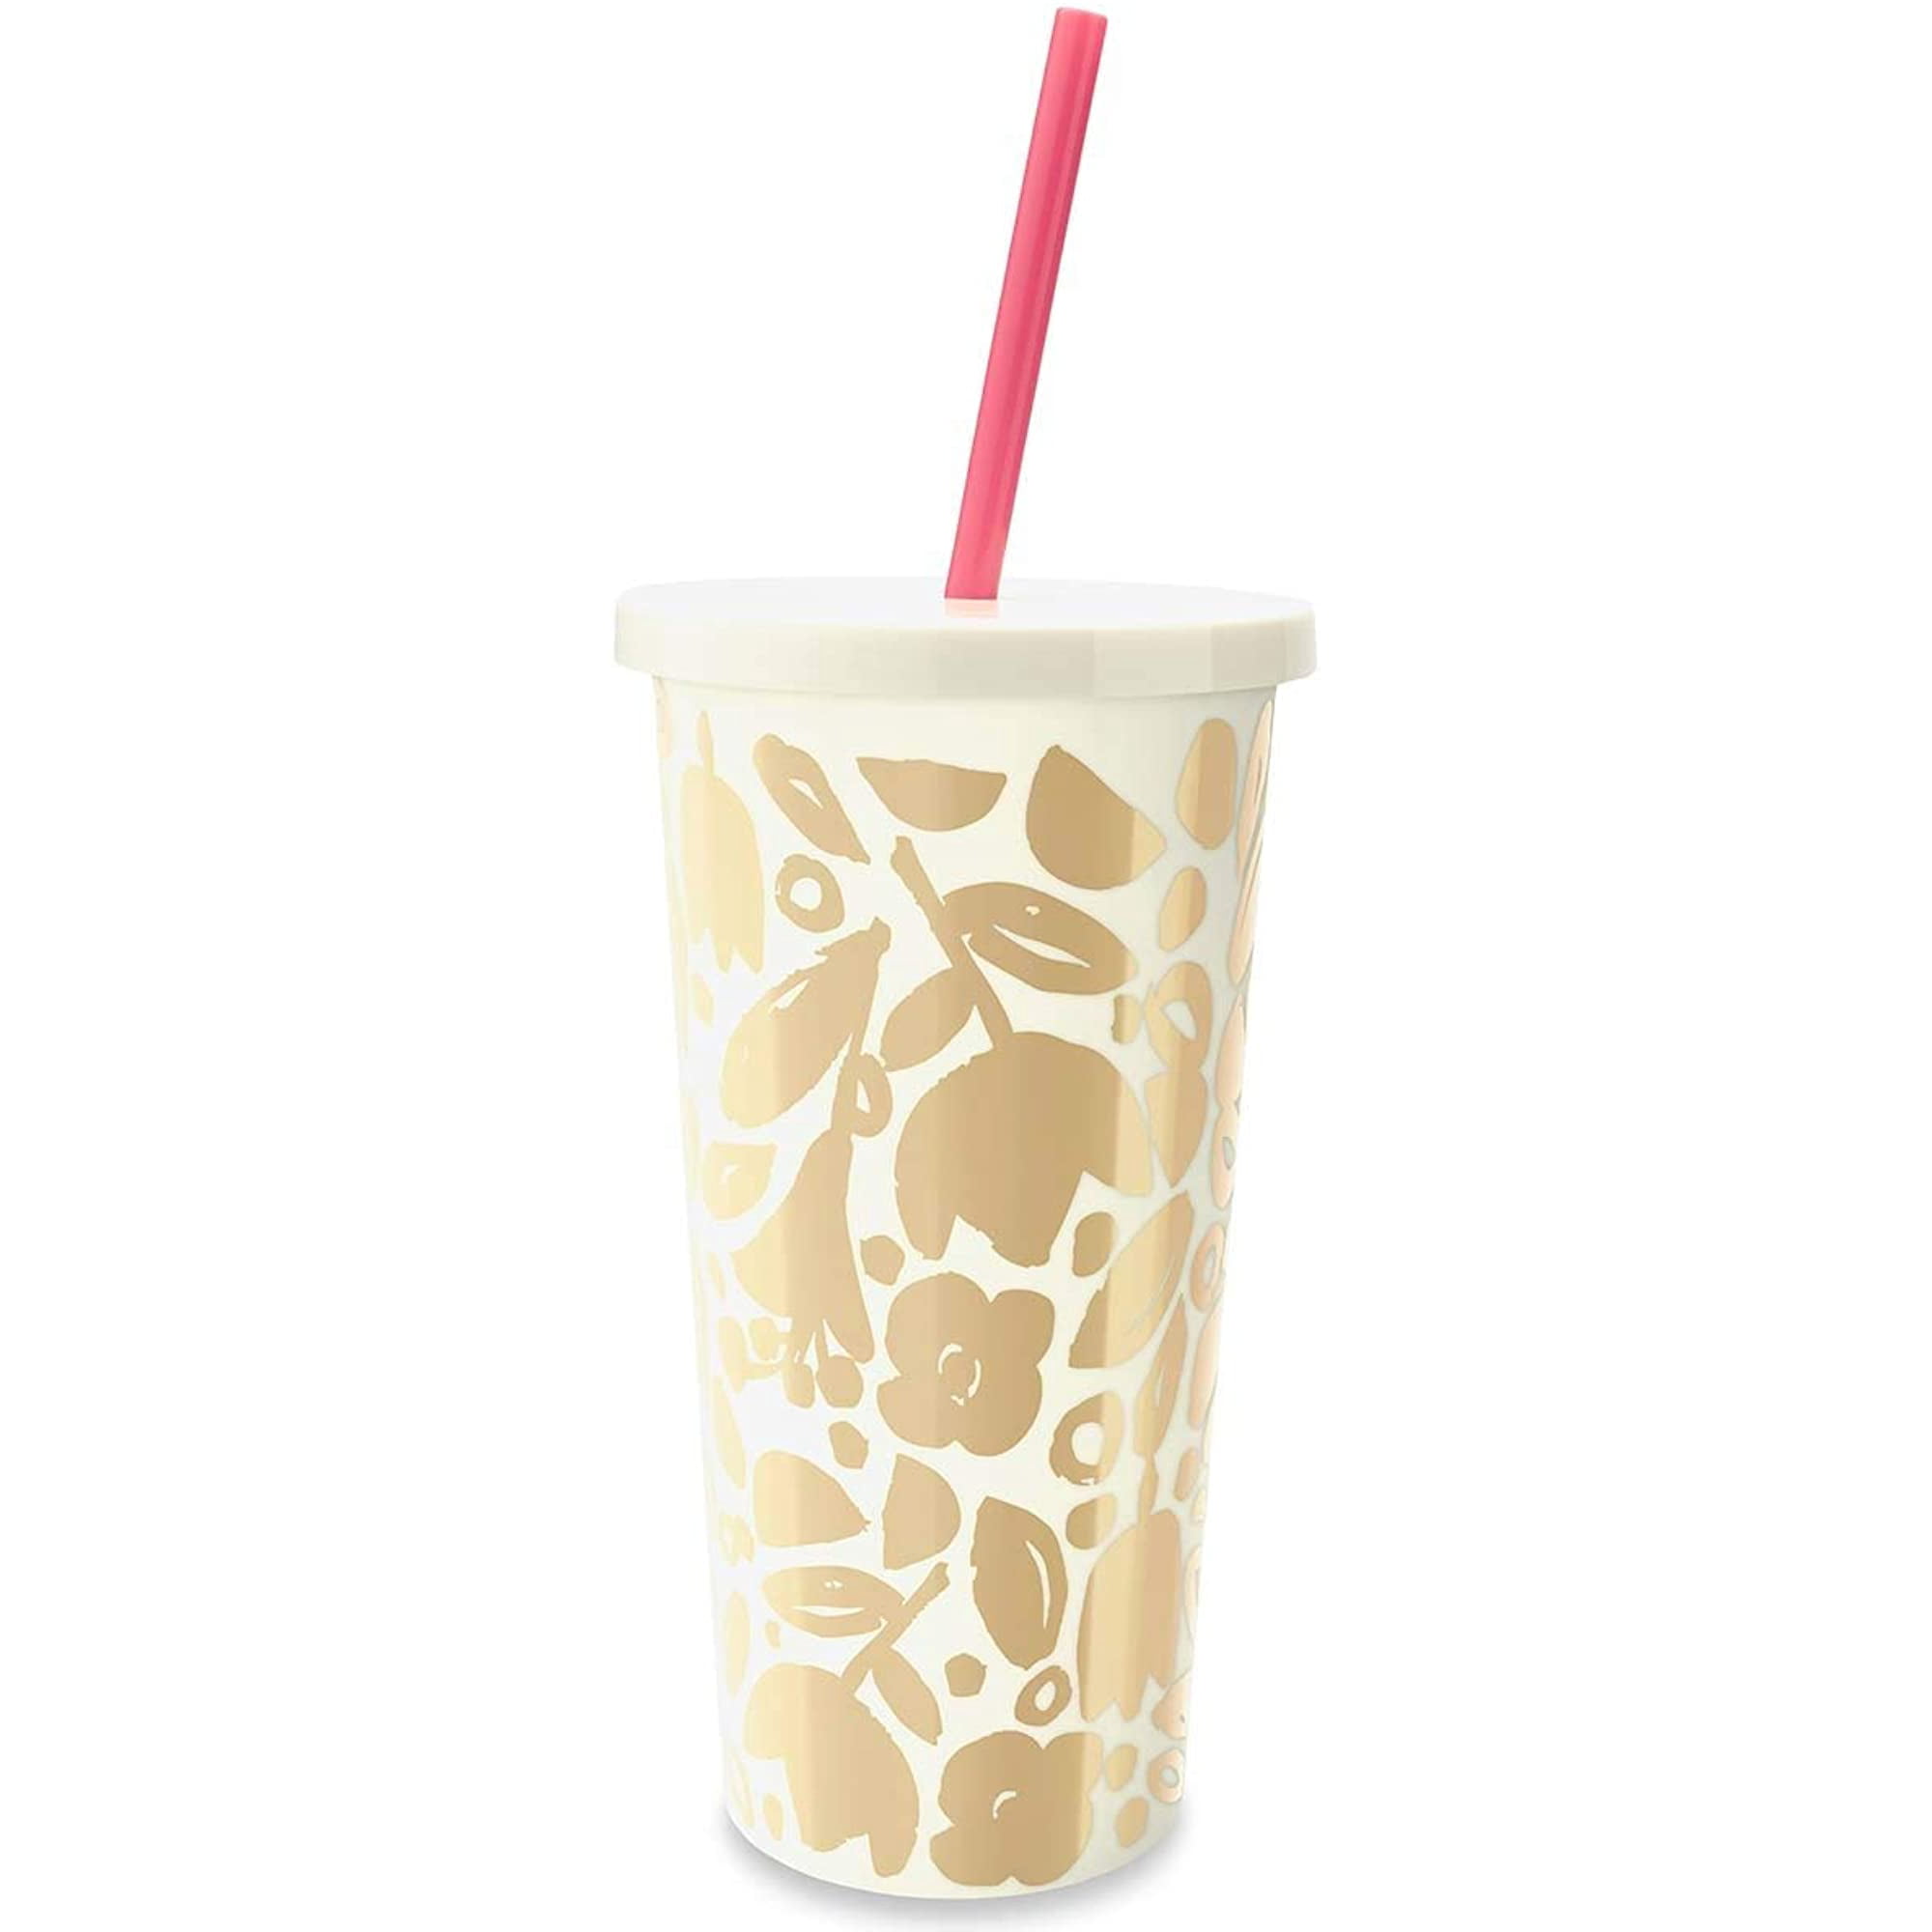 Kate Spade New York Insulated Plastic Tumbler with Reusable Silicone Straw,  20 Ounces, Golden Floral | Walmart Canada